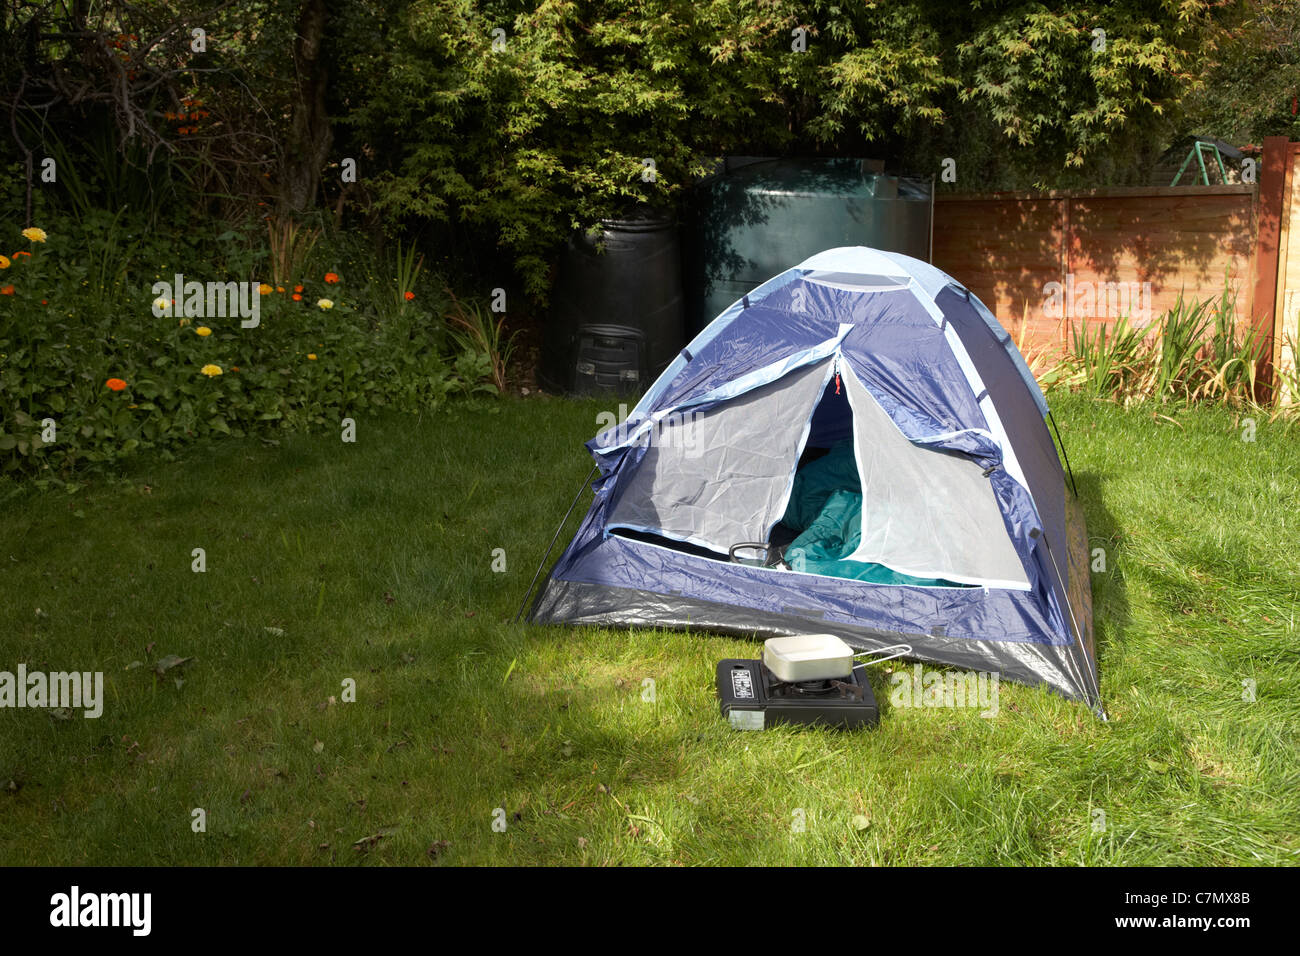 front door left open on a small dome tent pitched in the garden of the house in the uk Stock Photo